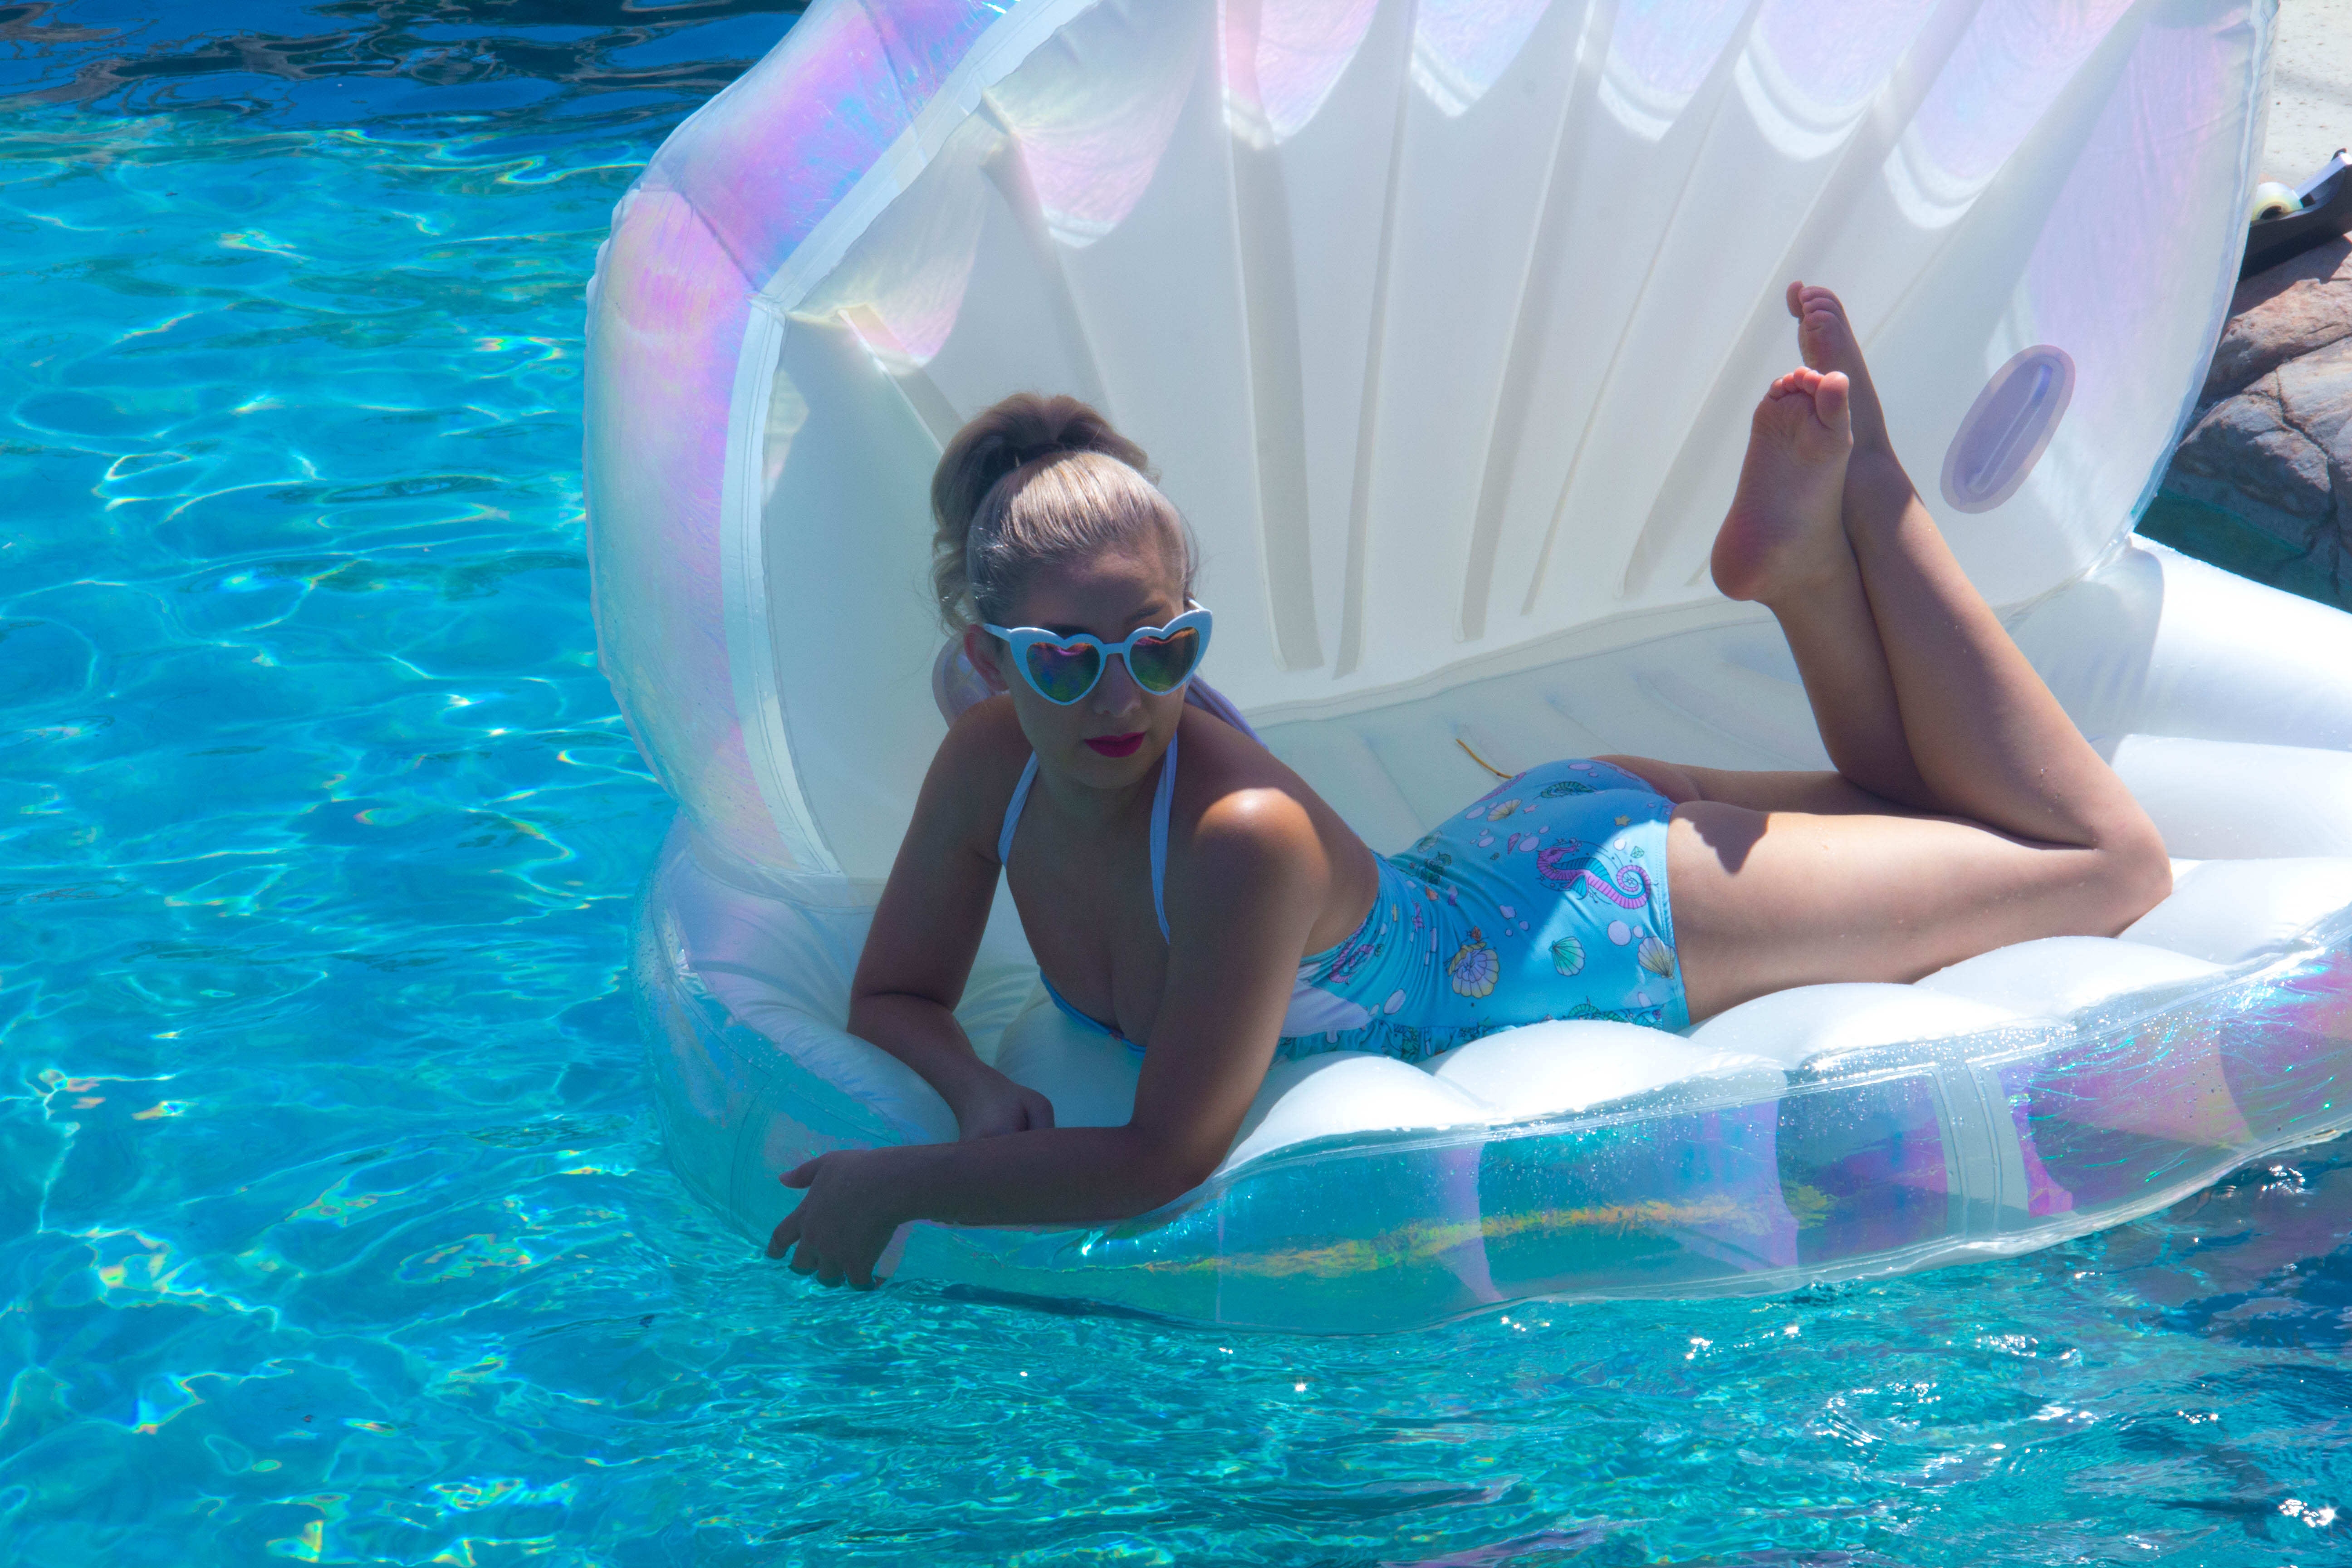 Floaties You Need to Have to Make Any Pool Party a Splash